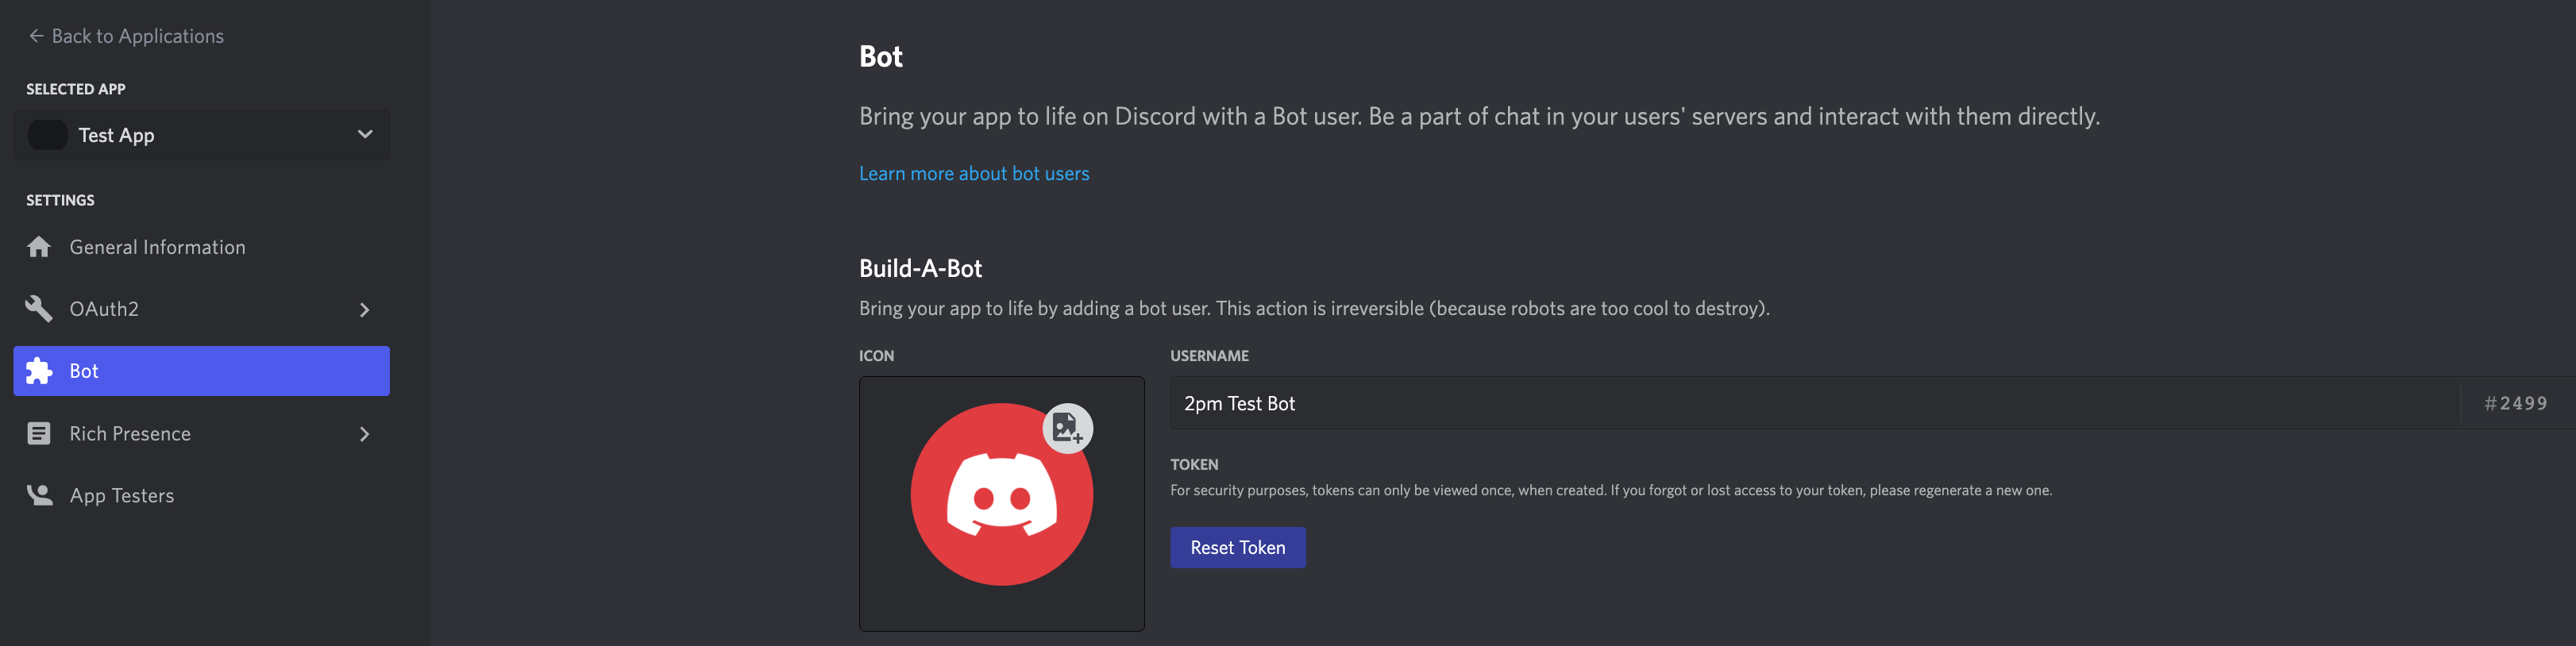 Build a Discord Bot in 6 Minutes With Node.js and Autocode - DEV Community